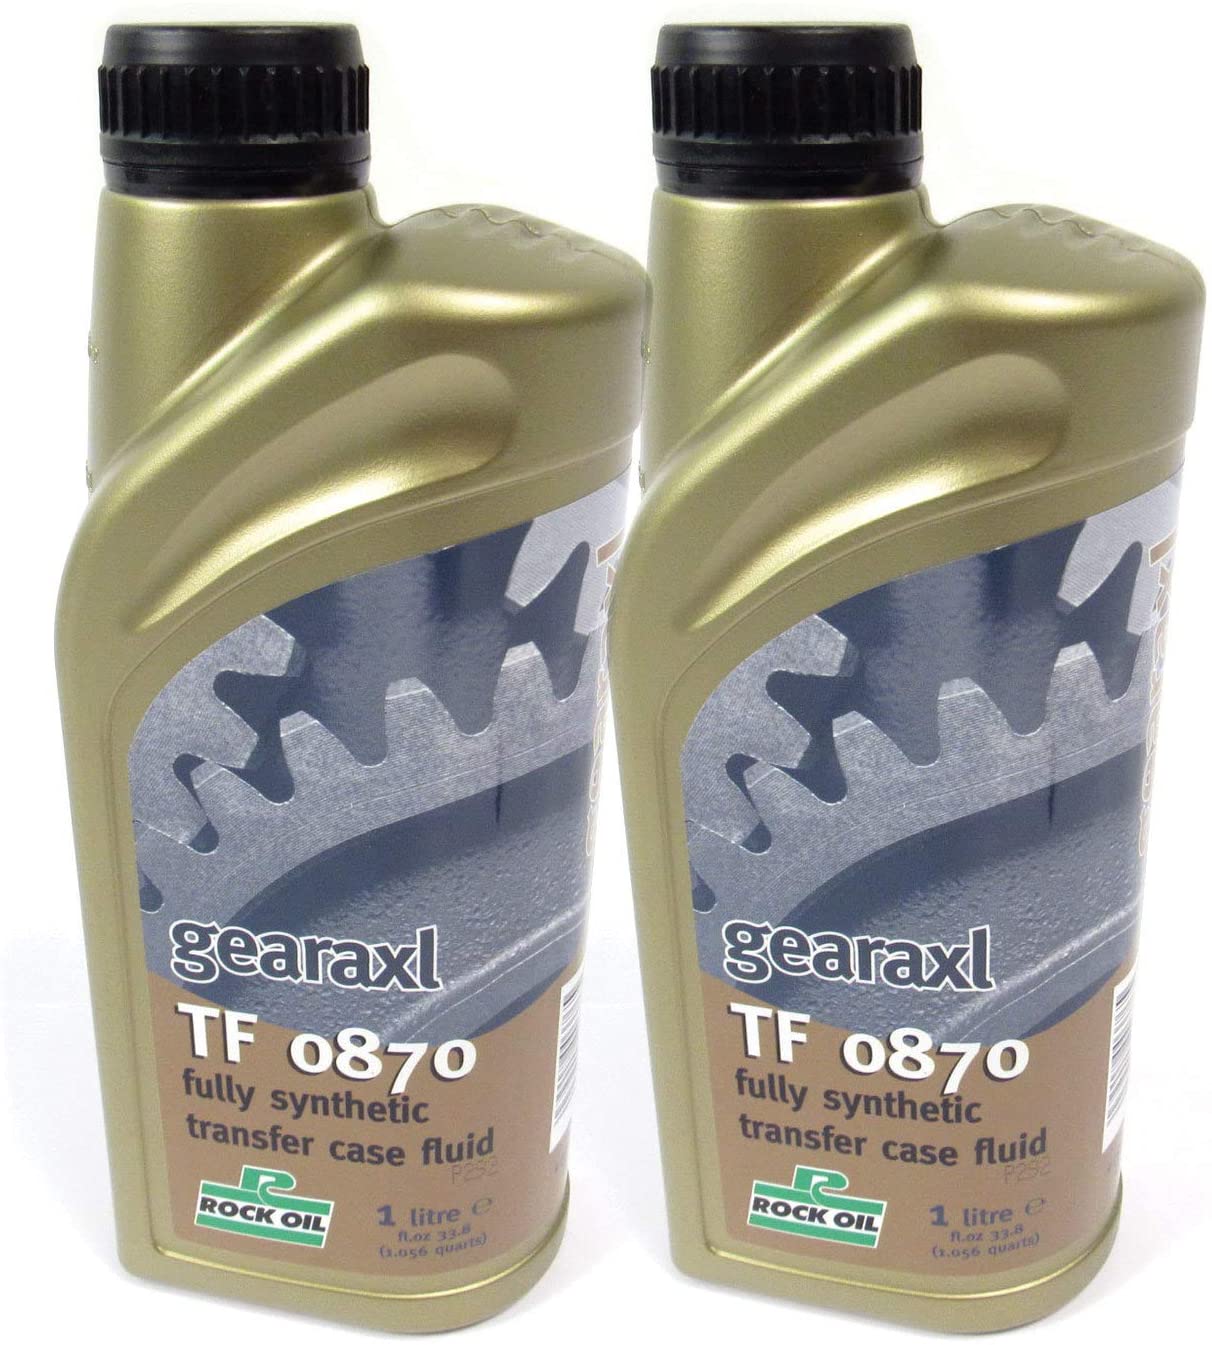 Set of 2 Rock Oil TF-0870 Full Synthetic Transfer Case Fluid (1 Liter) for Land Rover LR3, LR4, Range Rover Full Size, and Sport/Sport Supercharged